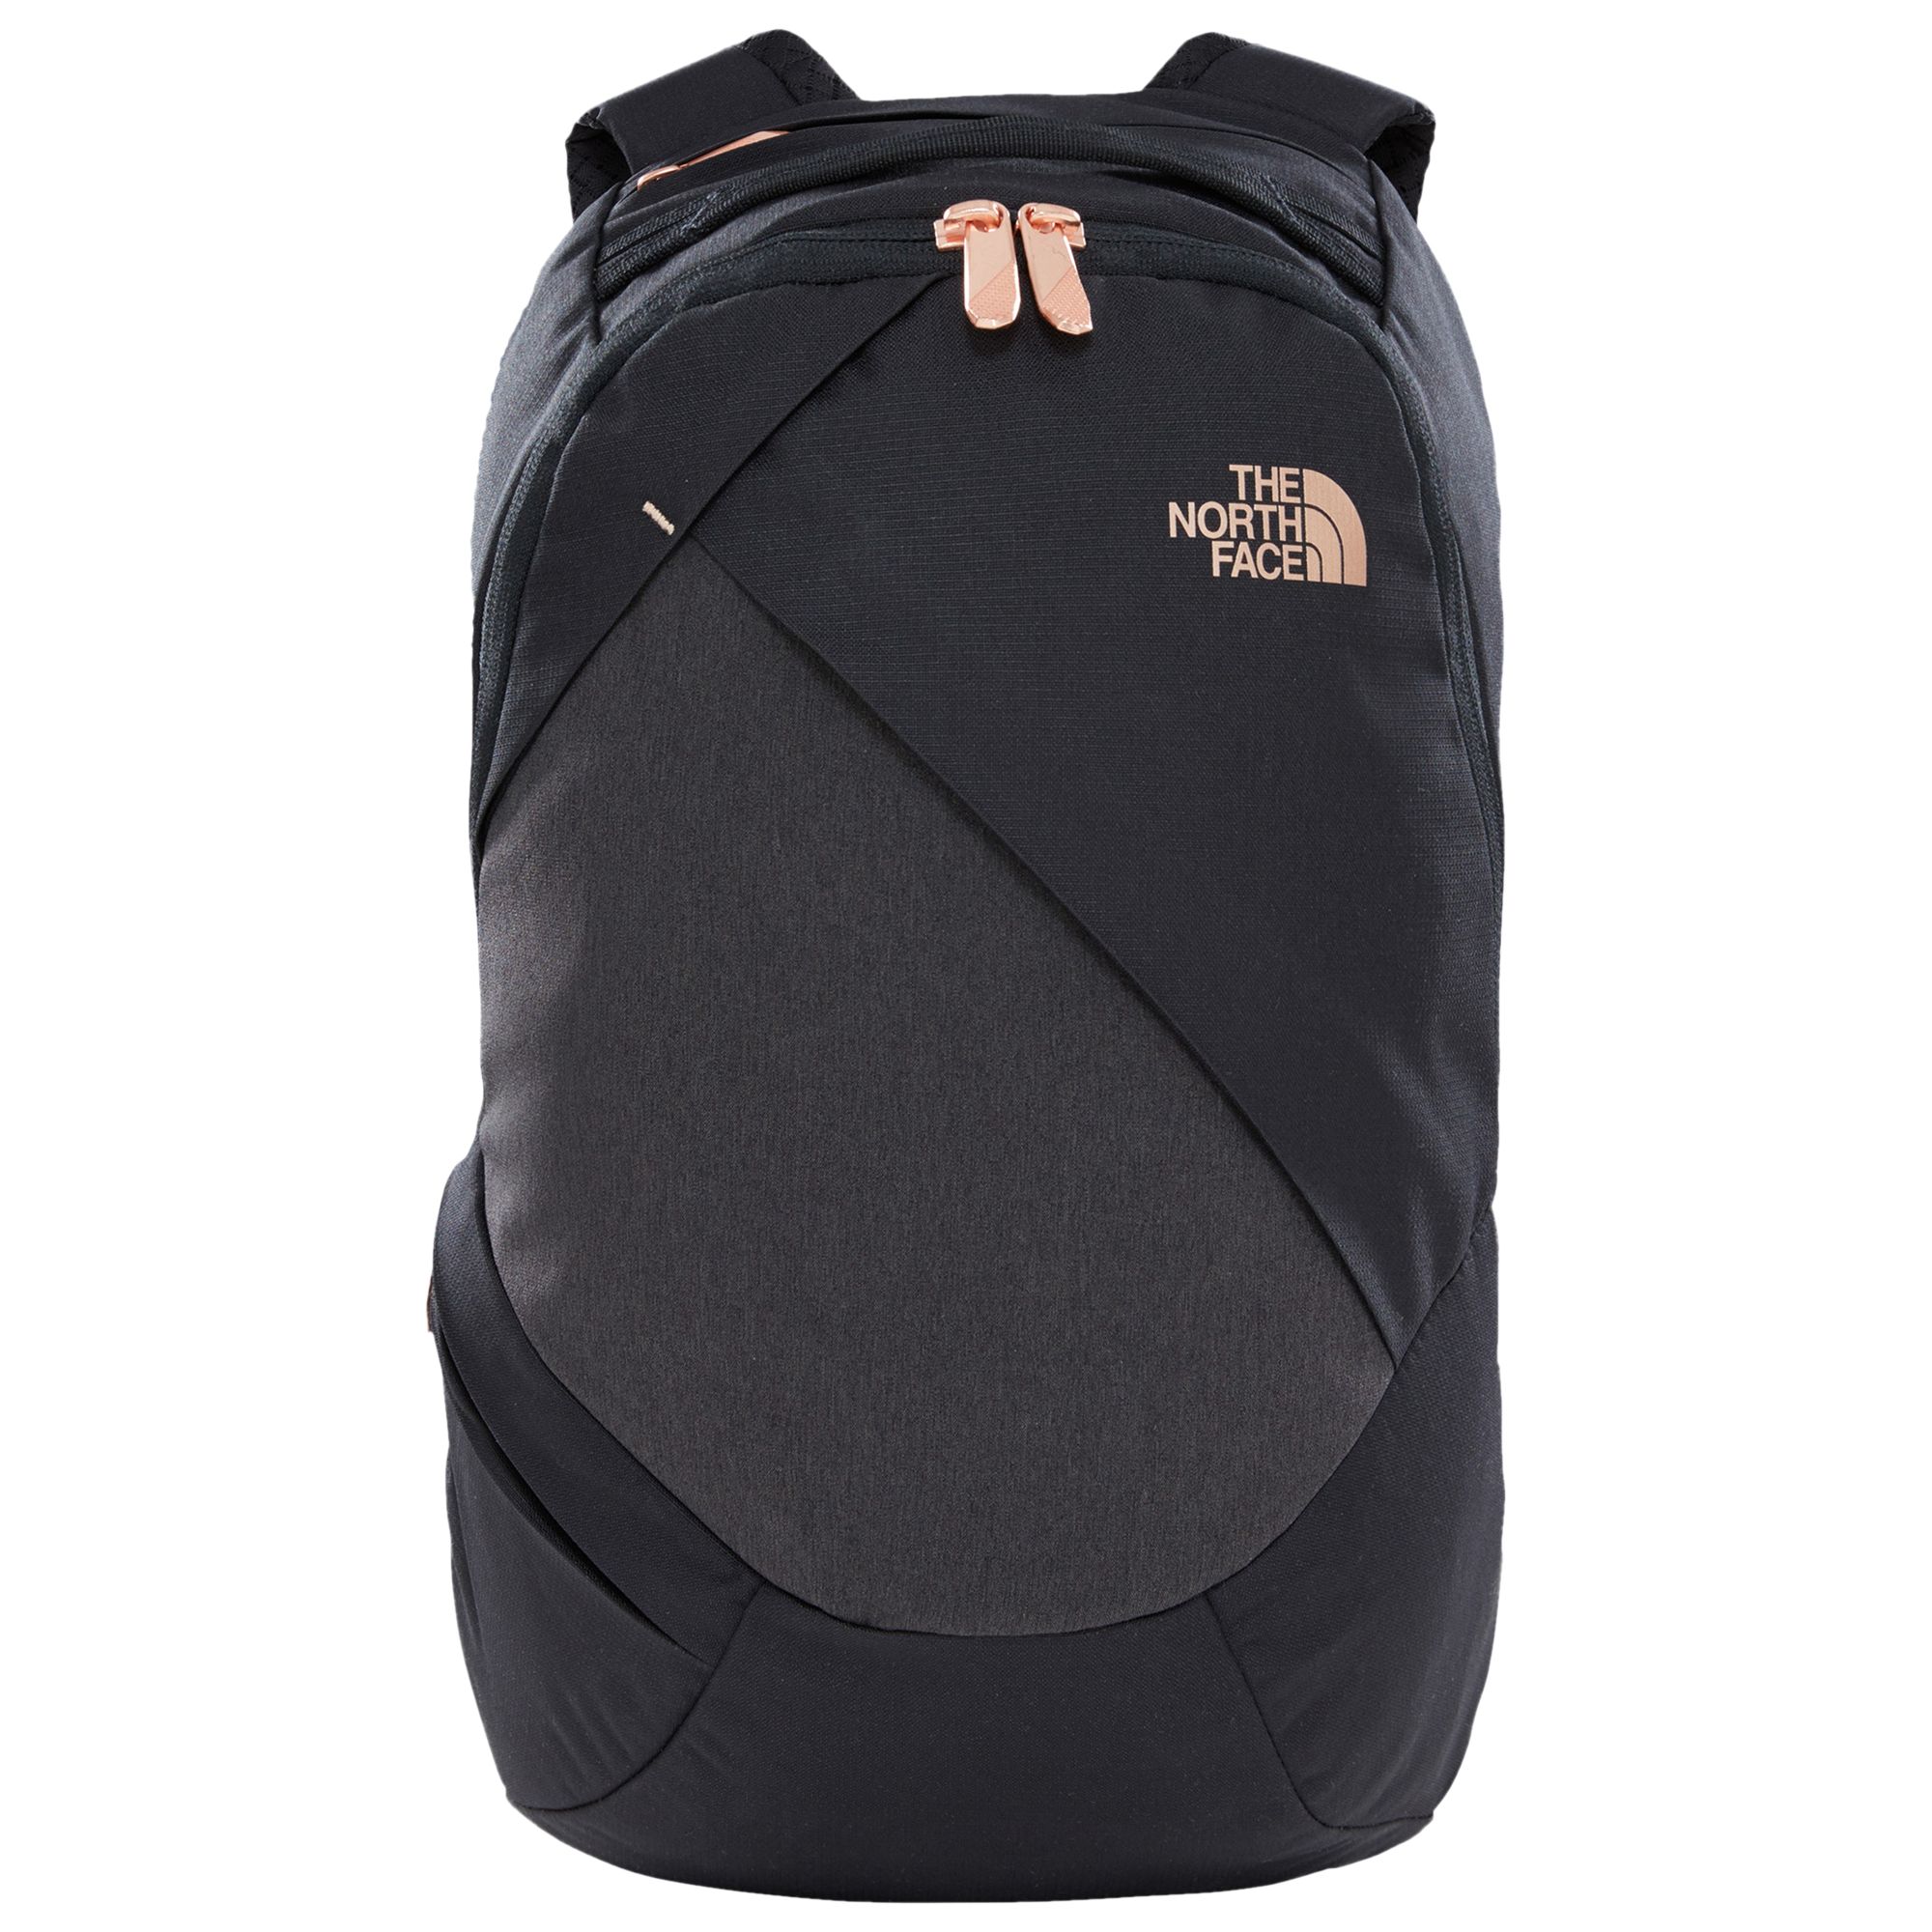 Download The North Face Electra Women's Backpack, Black at John ...